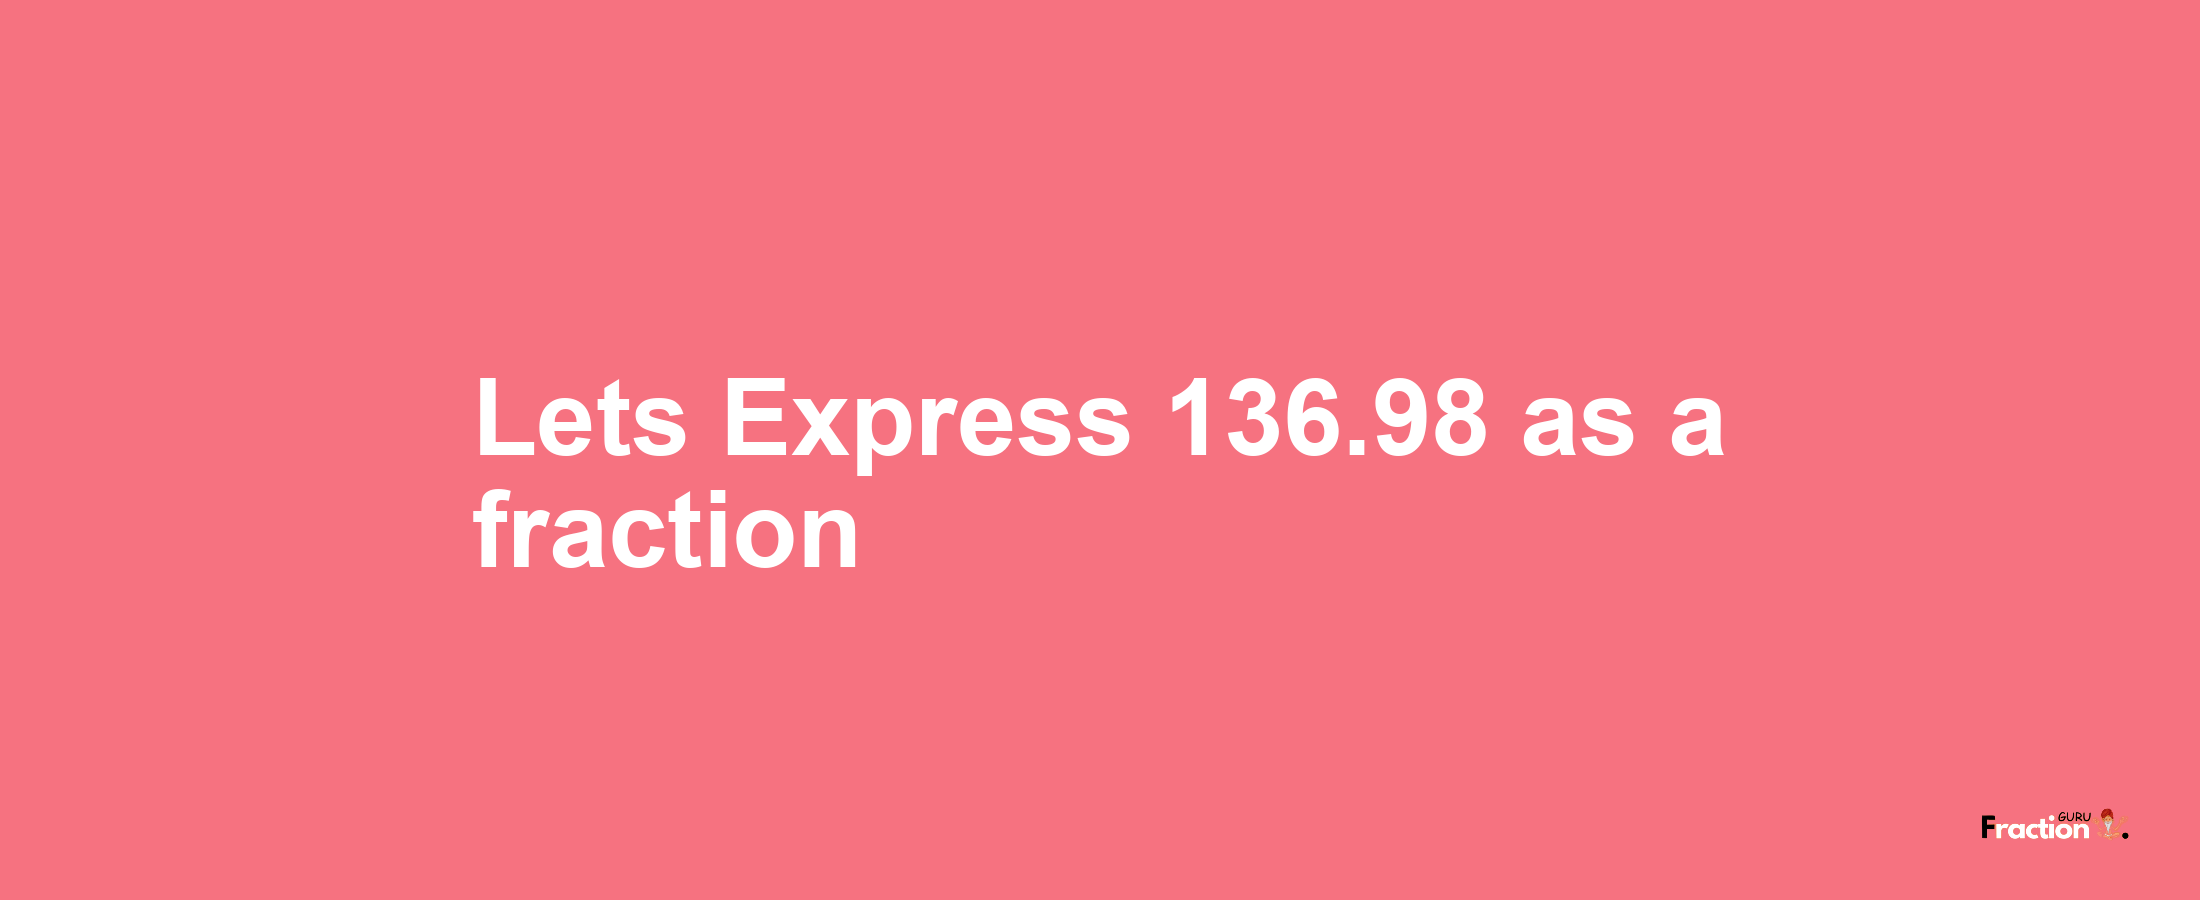 Lets Express 136.98 as afraction